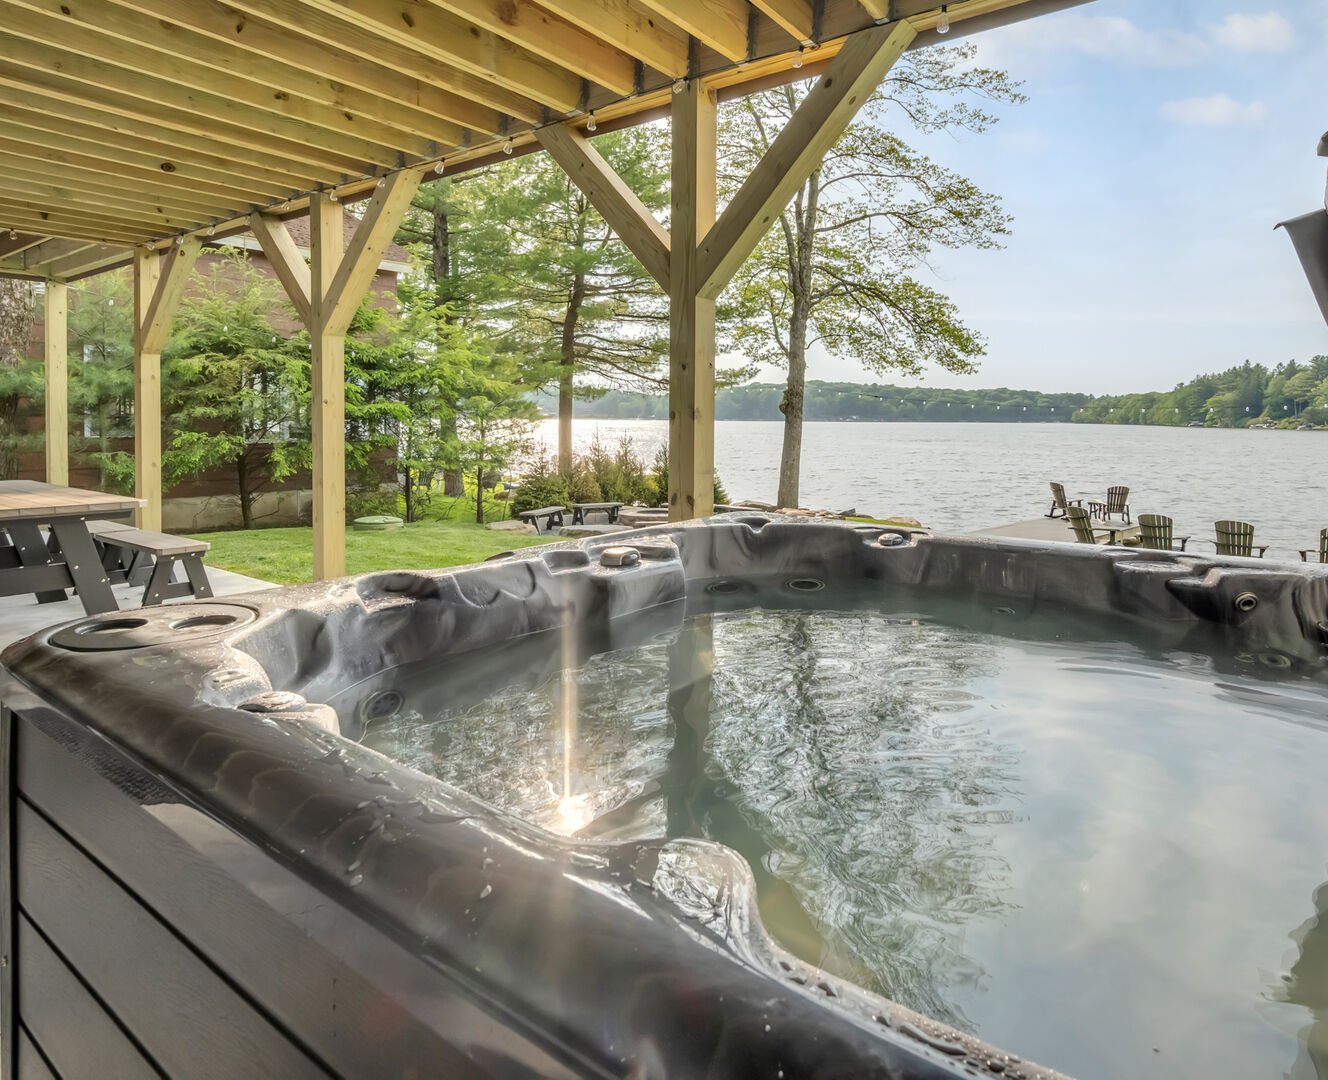 No Worries
You can't help but feel the Good Vibes washing over you in a Hot Tub with a view of Lake Harmony.